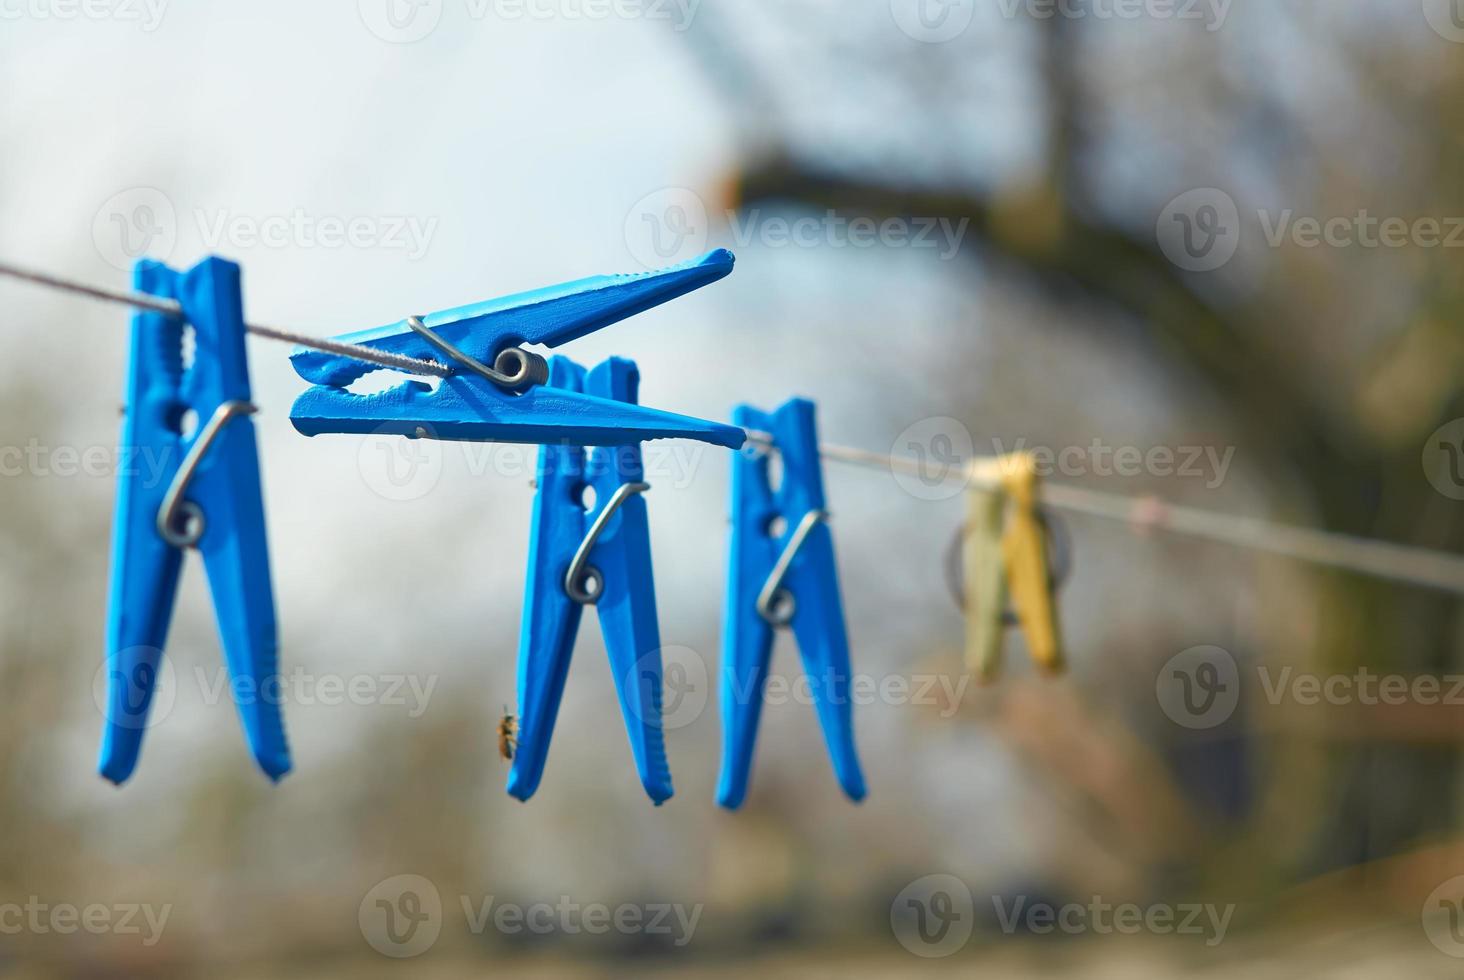 Clothespins on clothesline photo